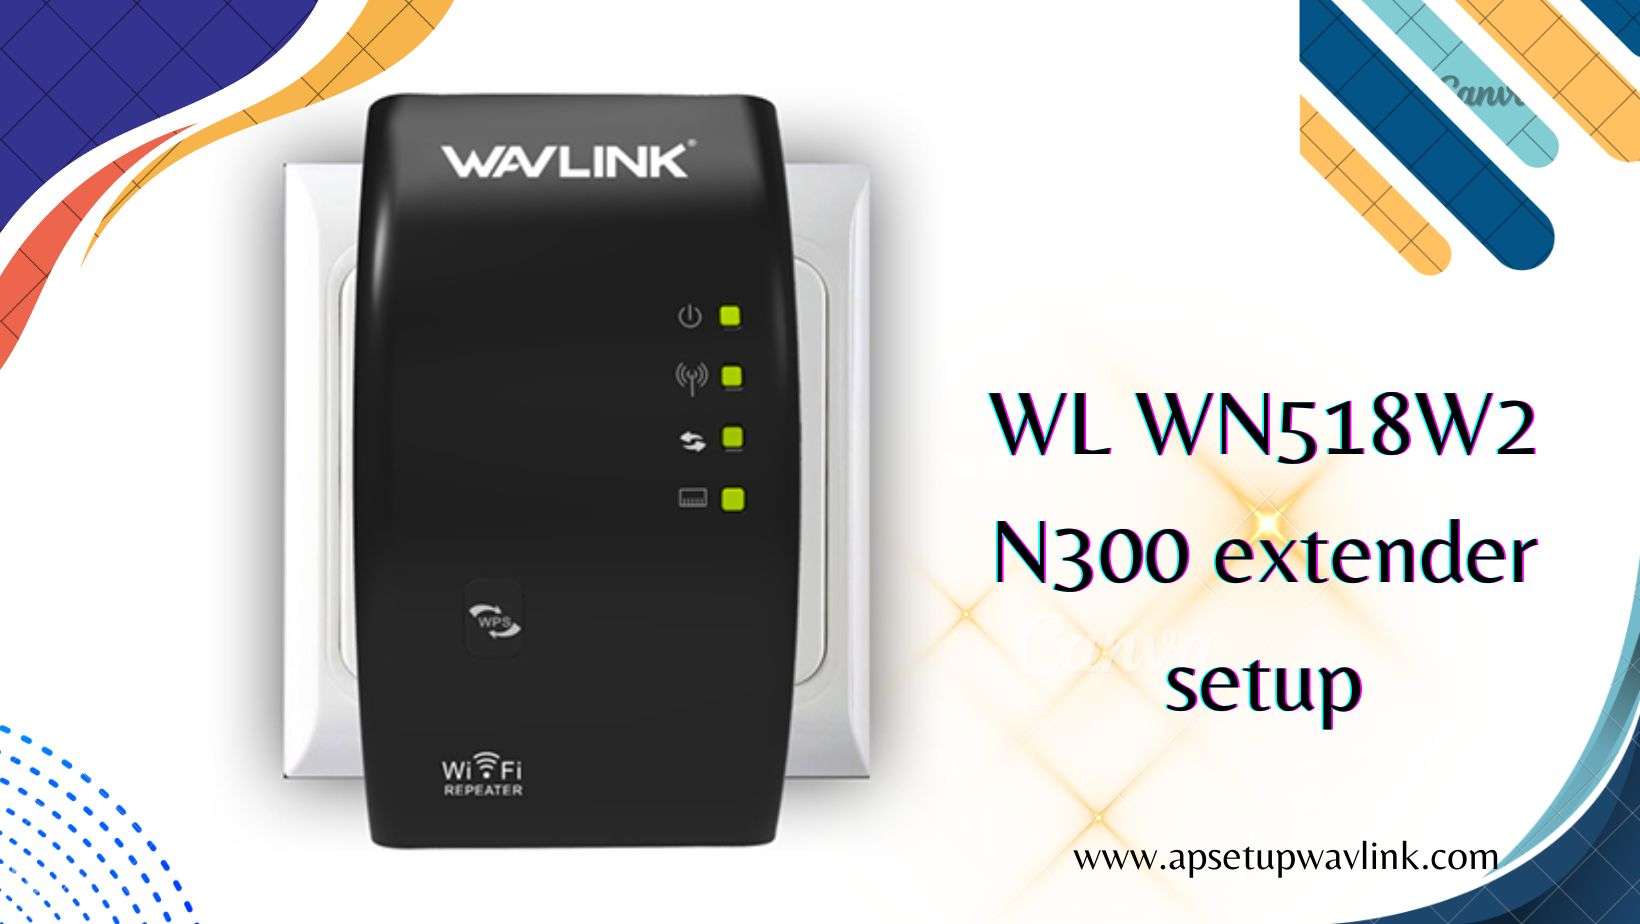 You are currently viewing Supercharge Your Connectivity with WL WN518W2 N300 extender setup